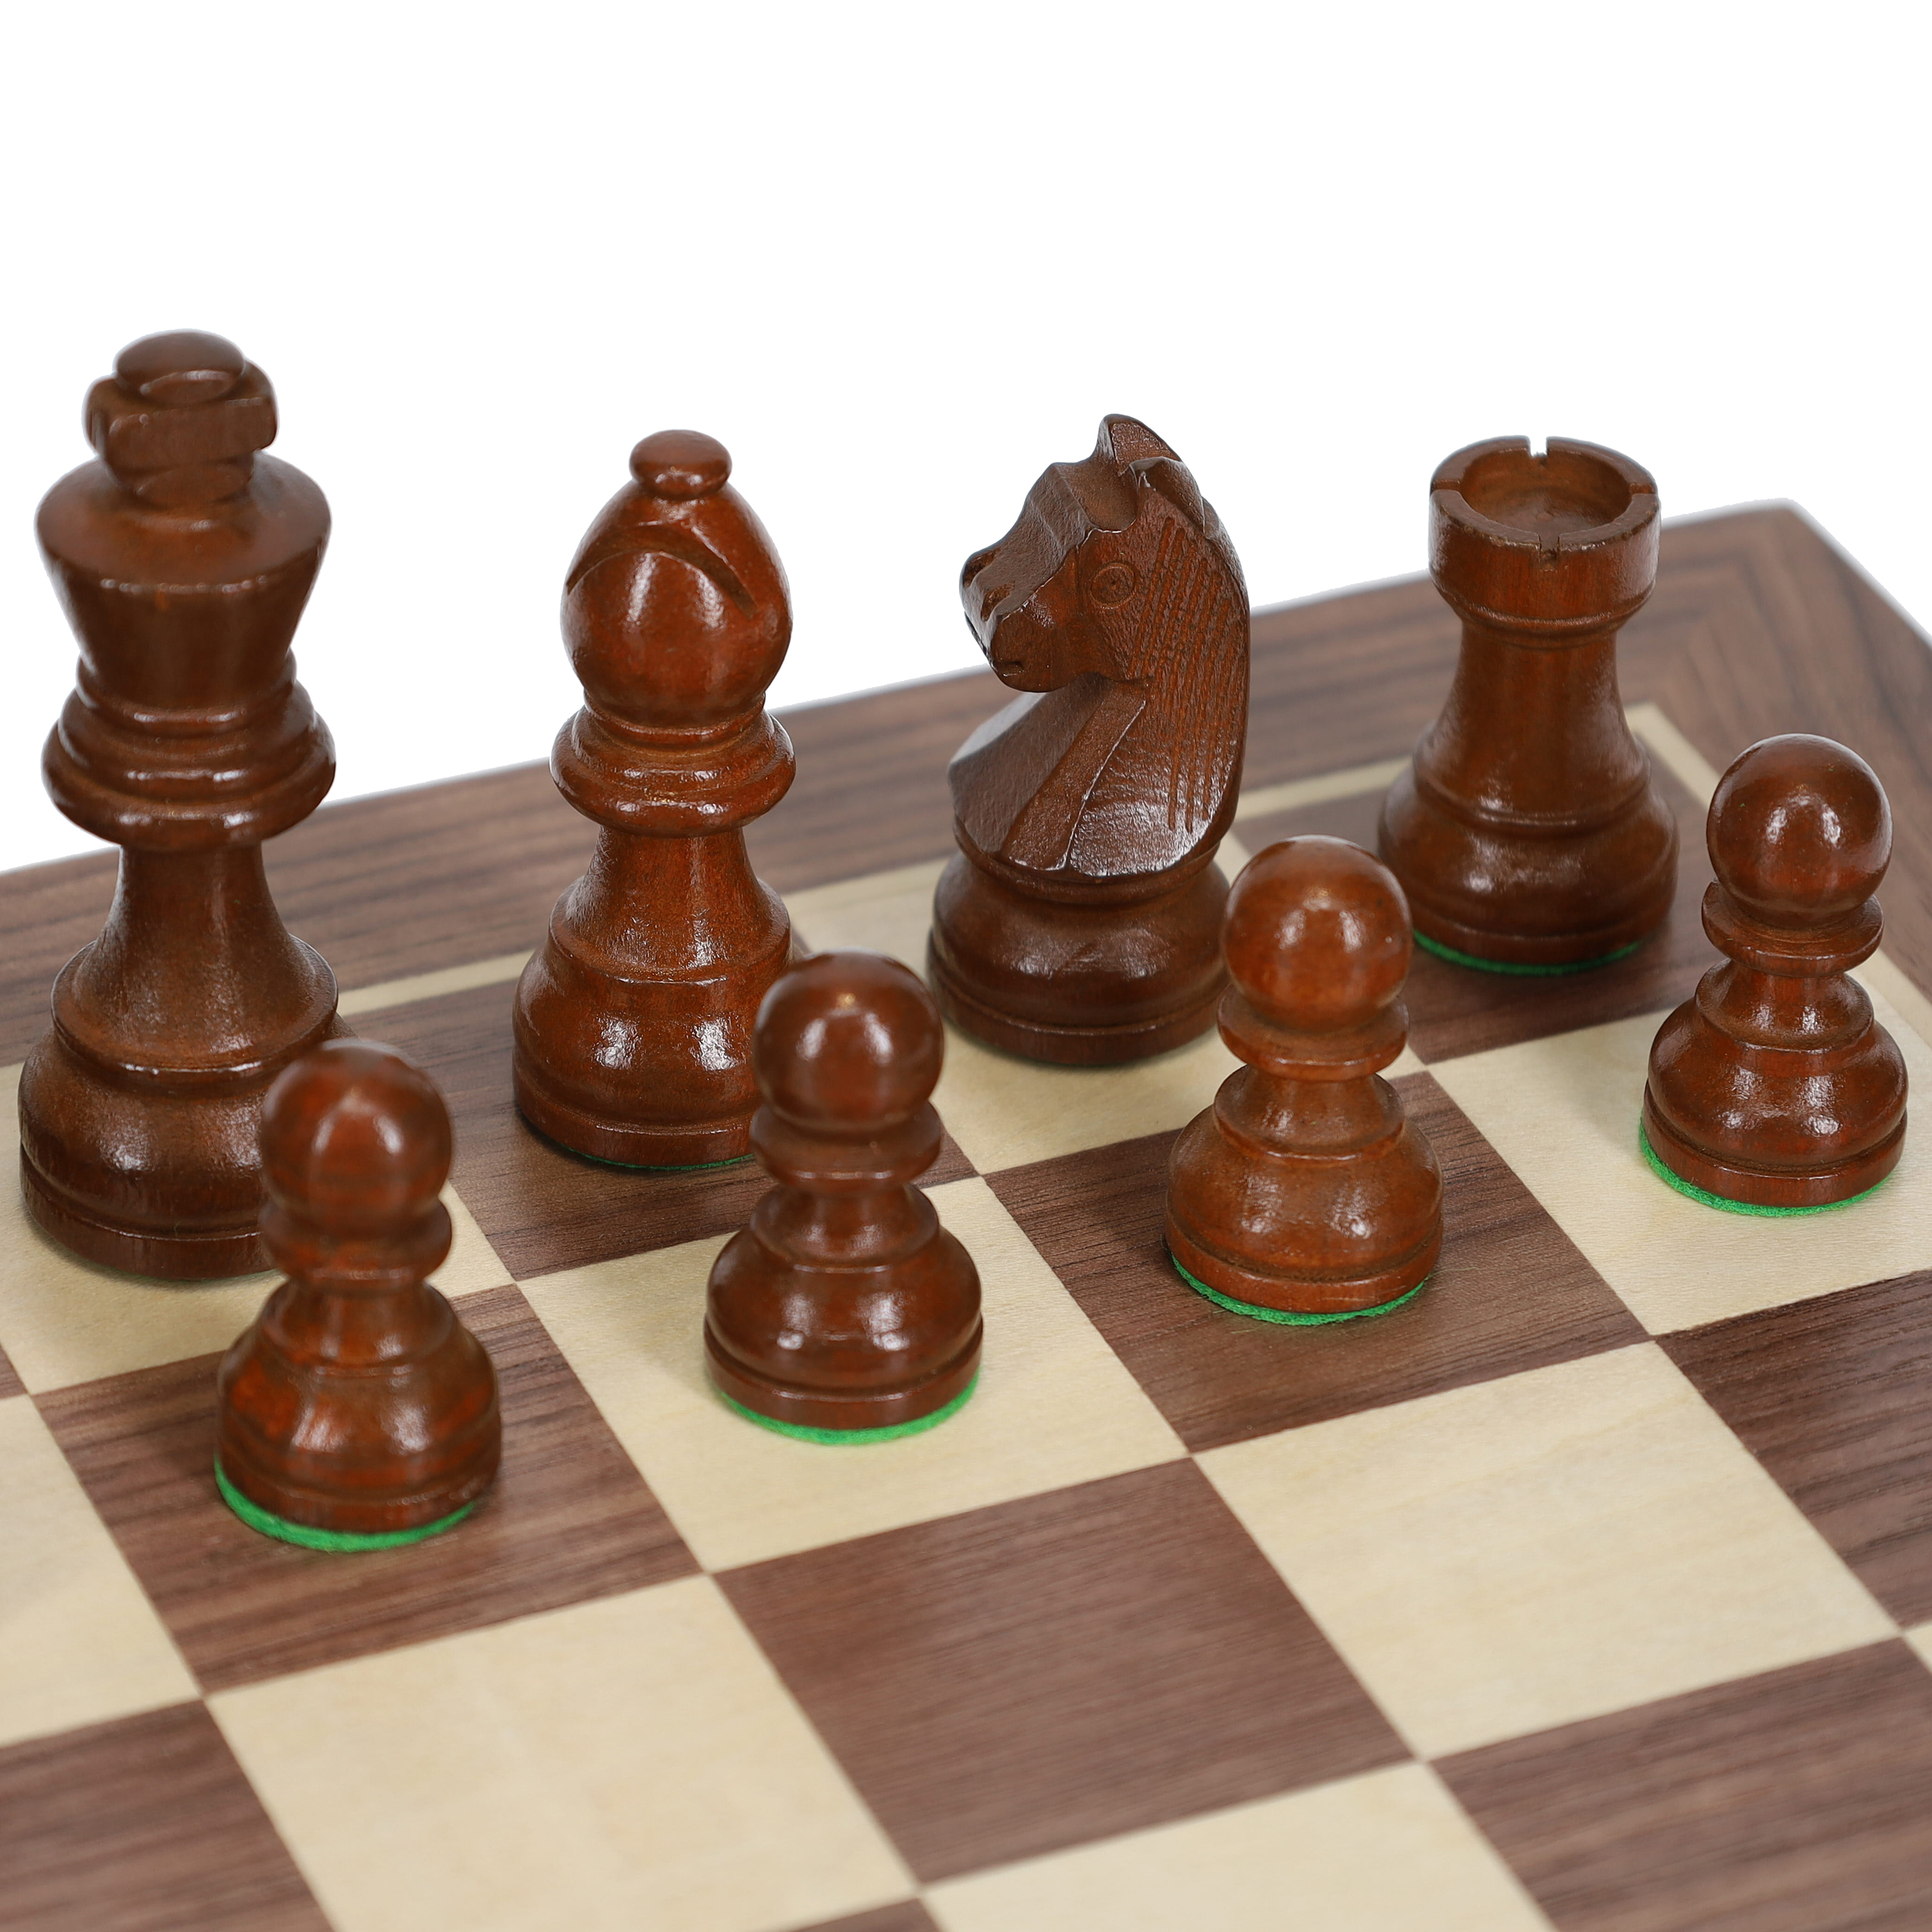 WE Games French Staunton Chess Pieces, Weighted Wood Pieces, 3. in. King, 1  unit - Harris Teeter